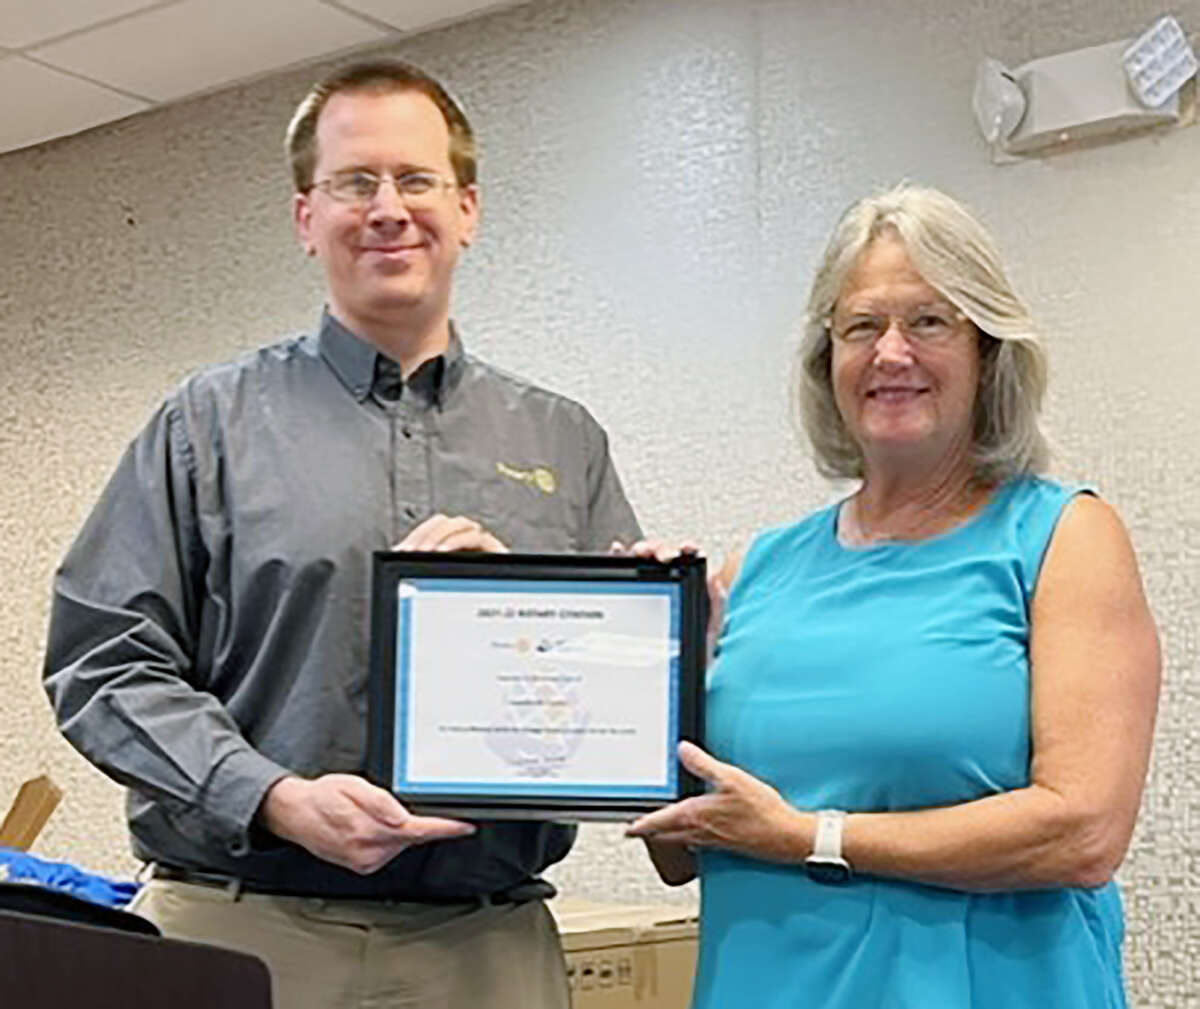 Jane Becker (right), Jacksonville Sunrise Rotary past president, receives a Rotary Citation certificate from Ryan Byers, immediate past district governor, during the club’s Aug. 30 meeting. The citation recognizes a club’s ability to meet goals outlined by Rotary International.